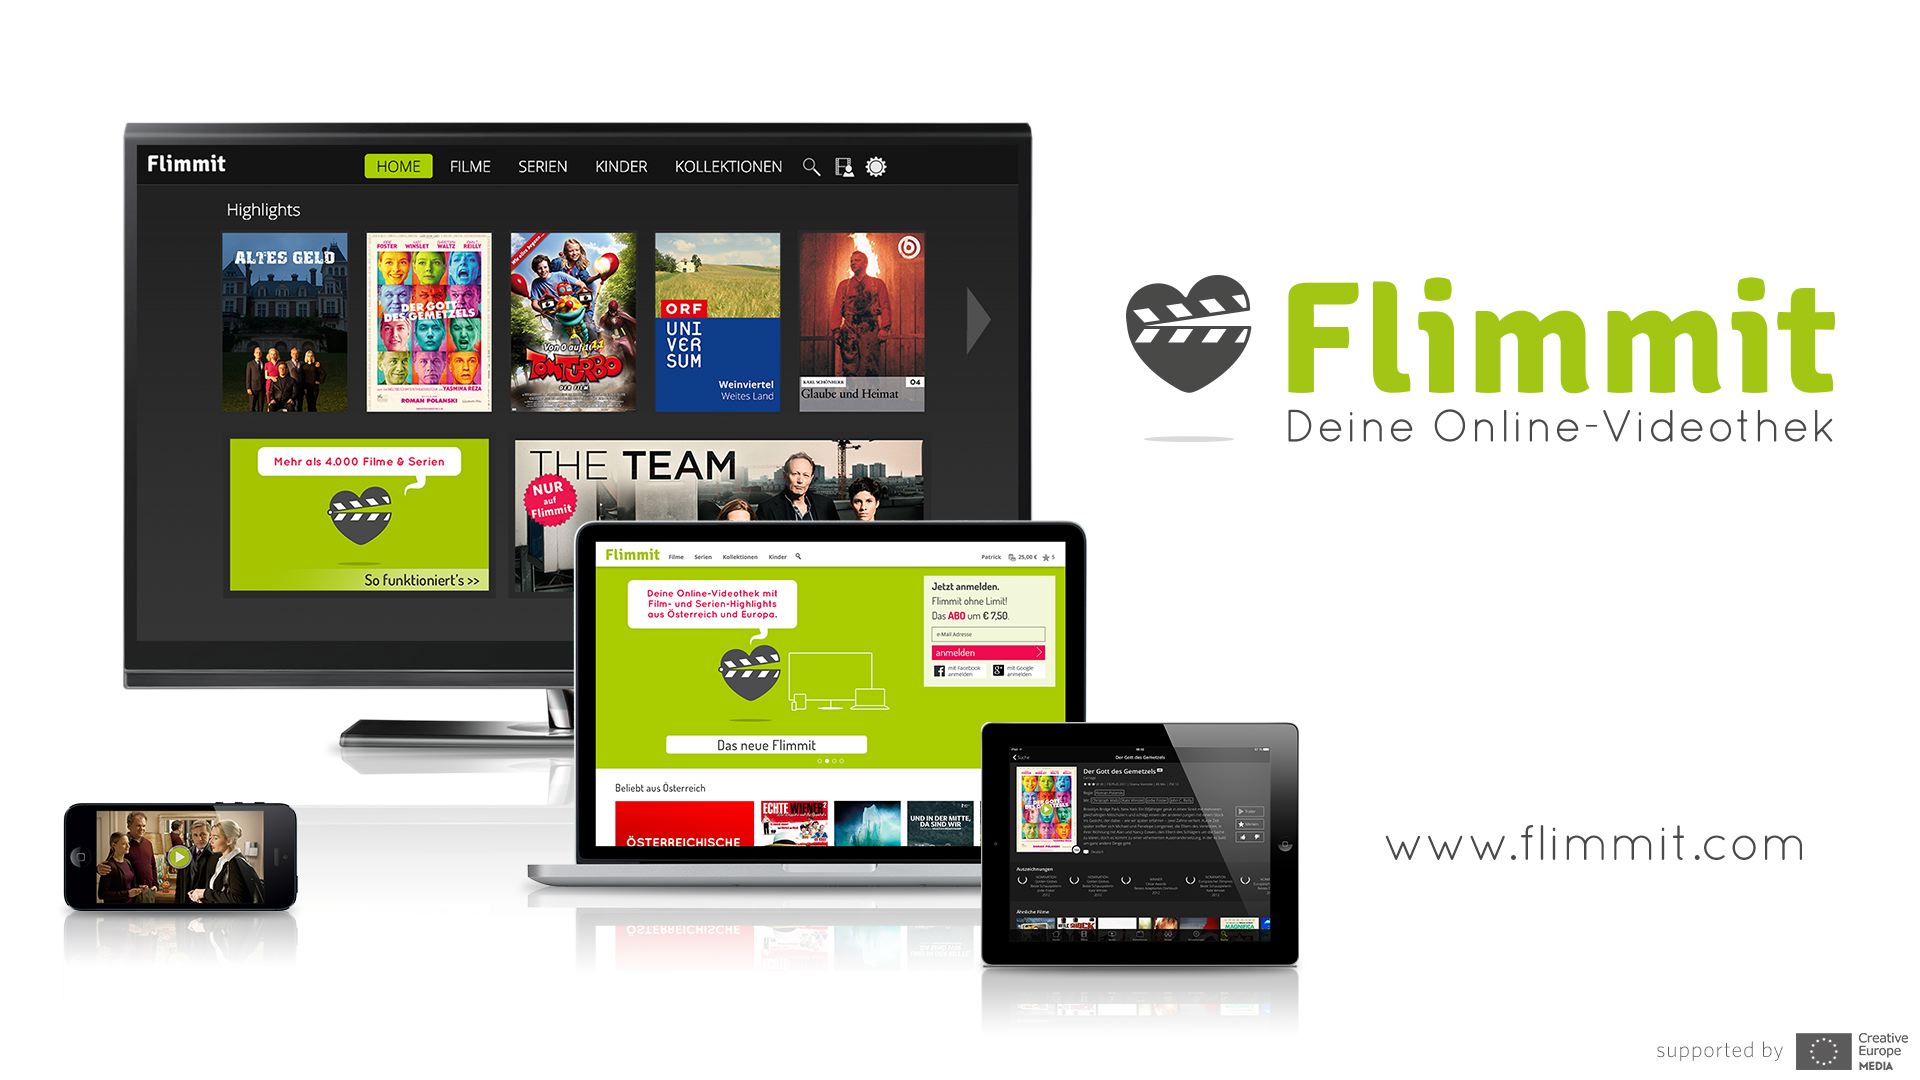 flimmit-all-devices_3c5a893.jpg